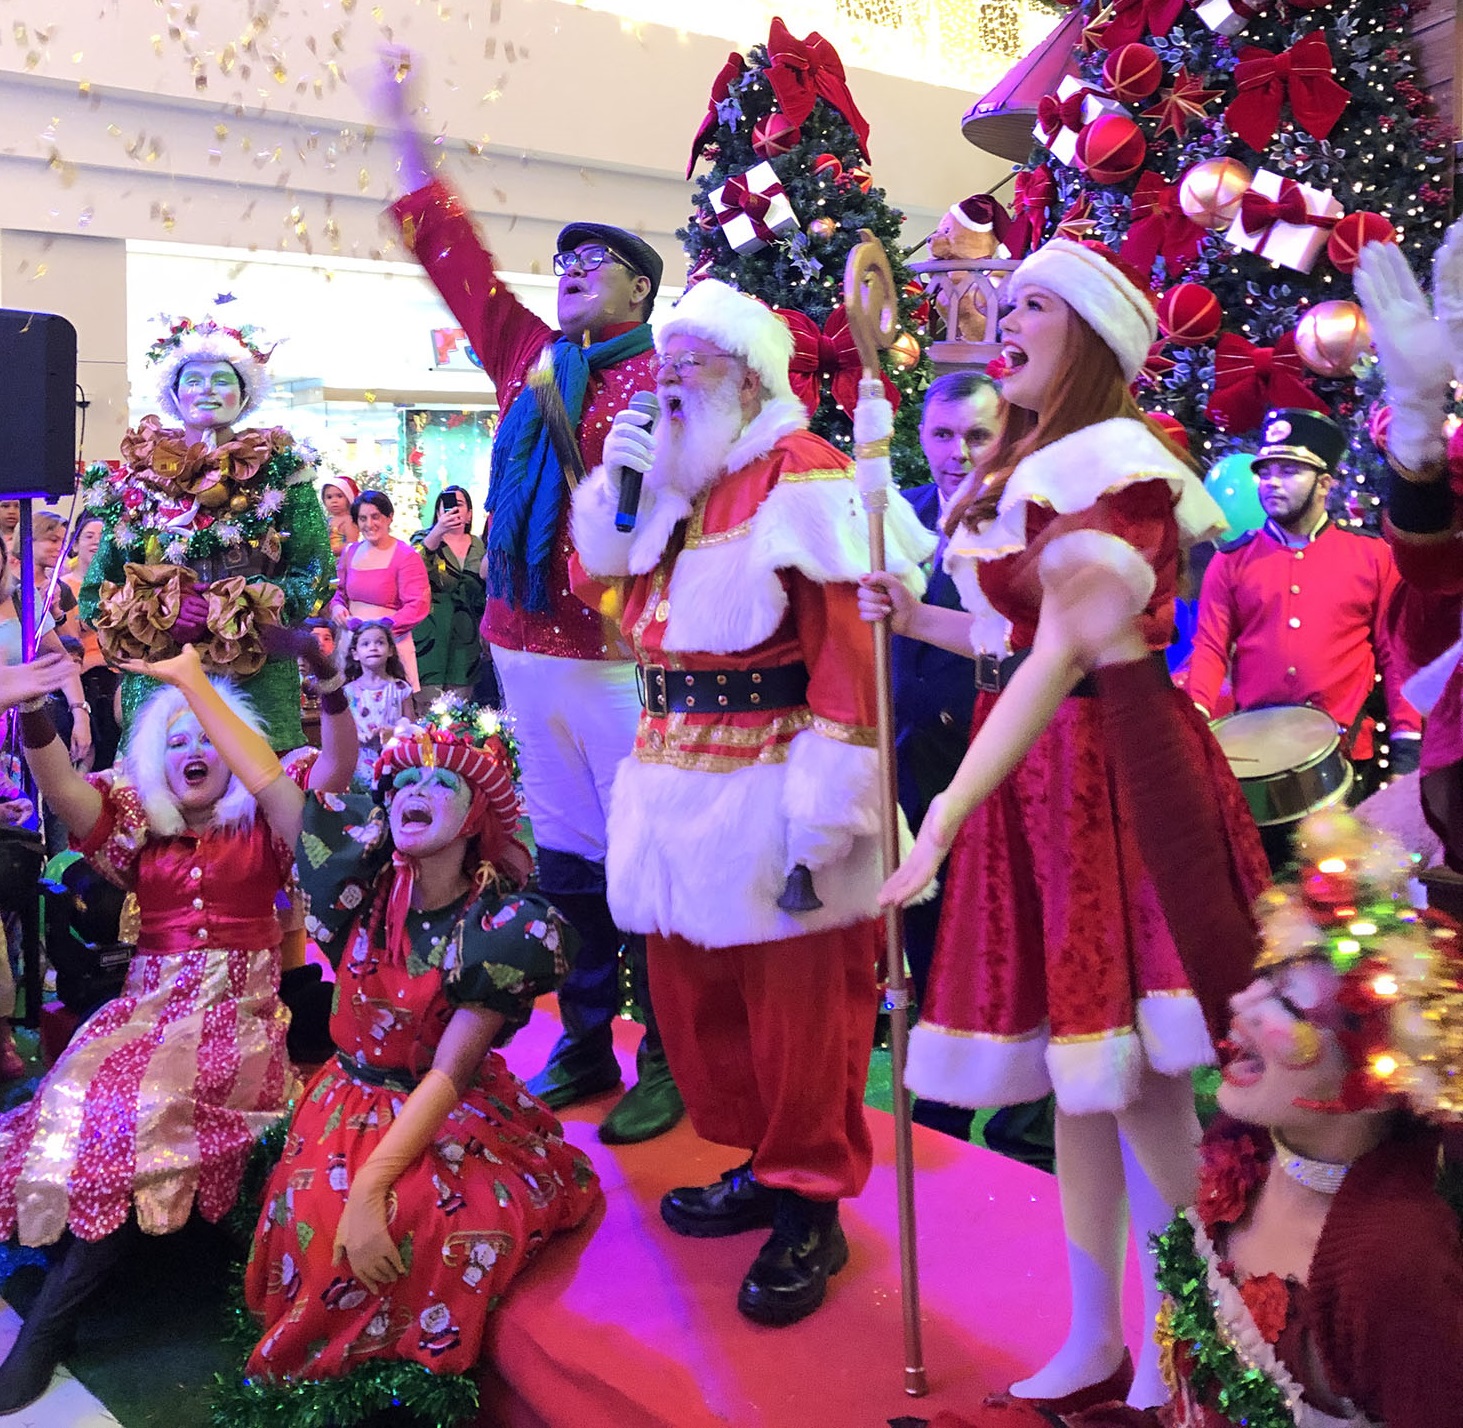 Manaus Shopping Mall welcomes Santa Claus and opens Sweets Factory